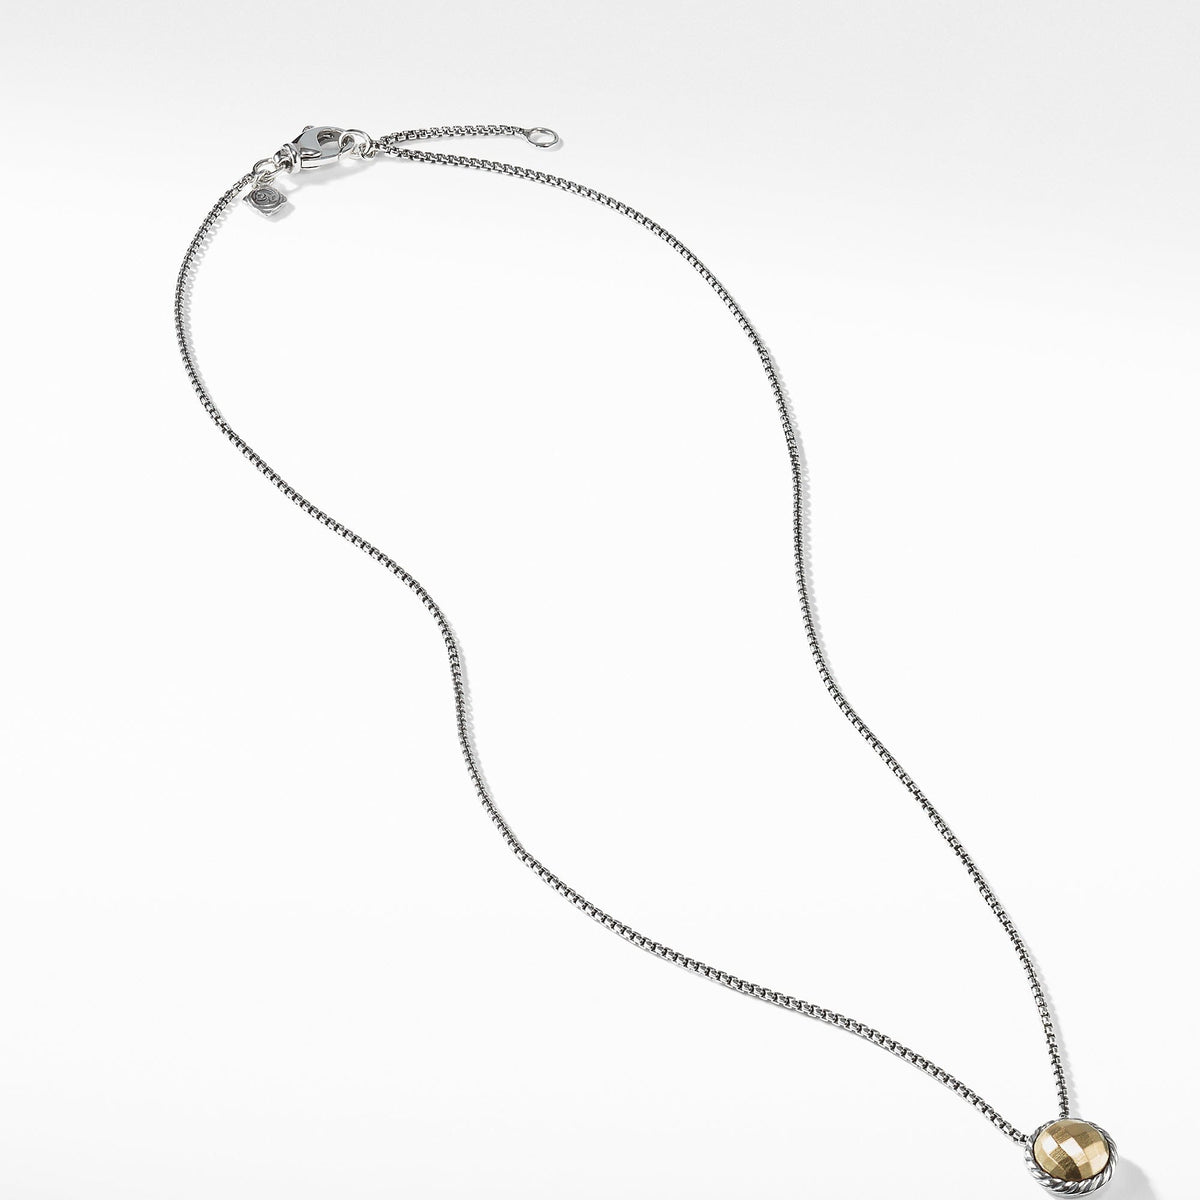 Necklace with Gold Dome and 18K Gold